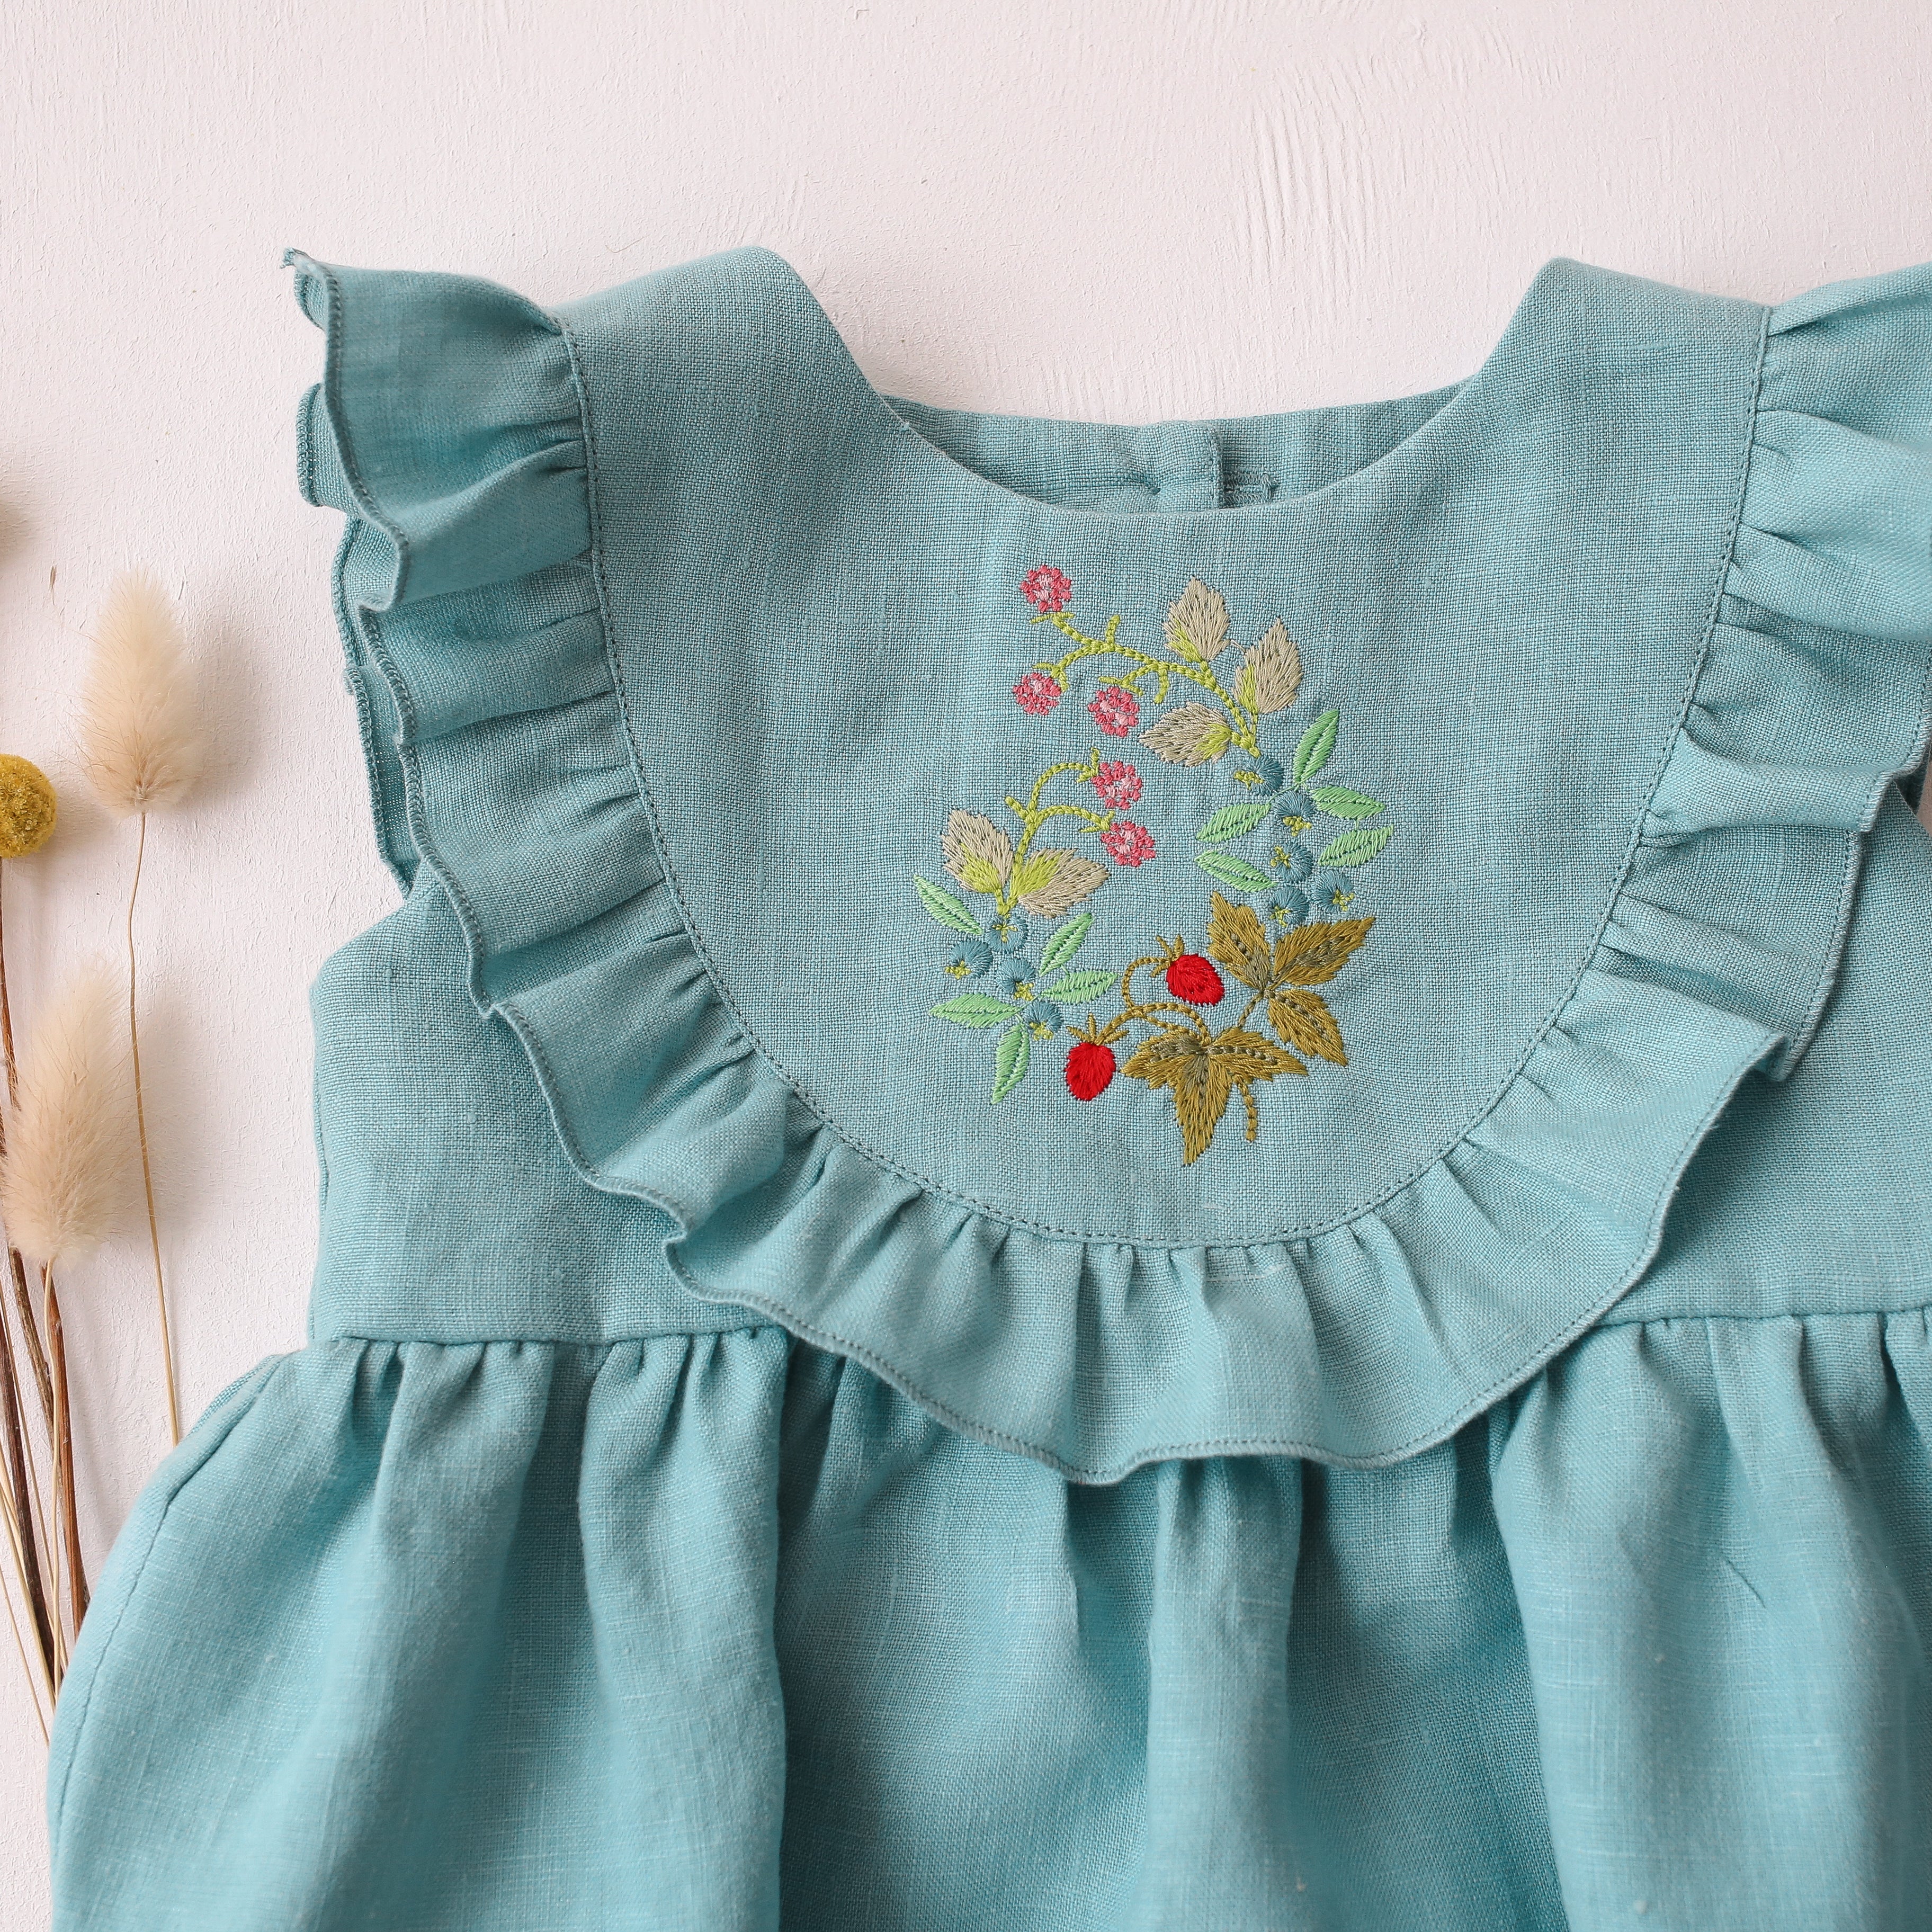 Duck Egg Blue Linen Ruffled Bodice Bubble Playsuit with “Berries” Embroidery